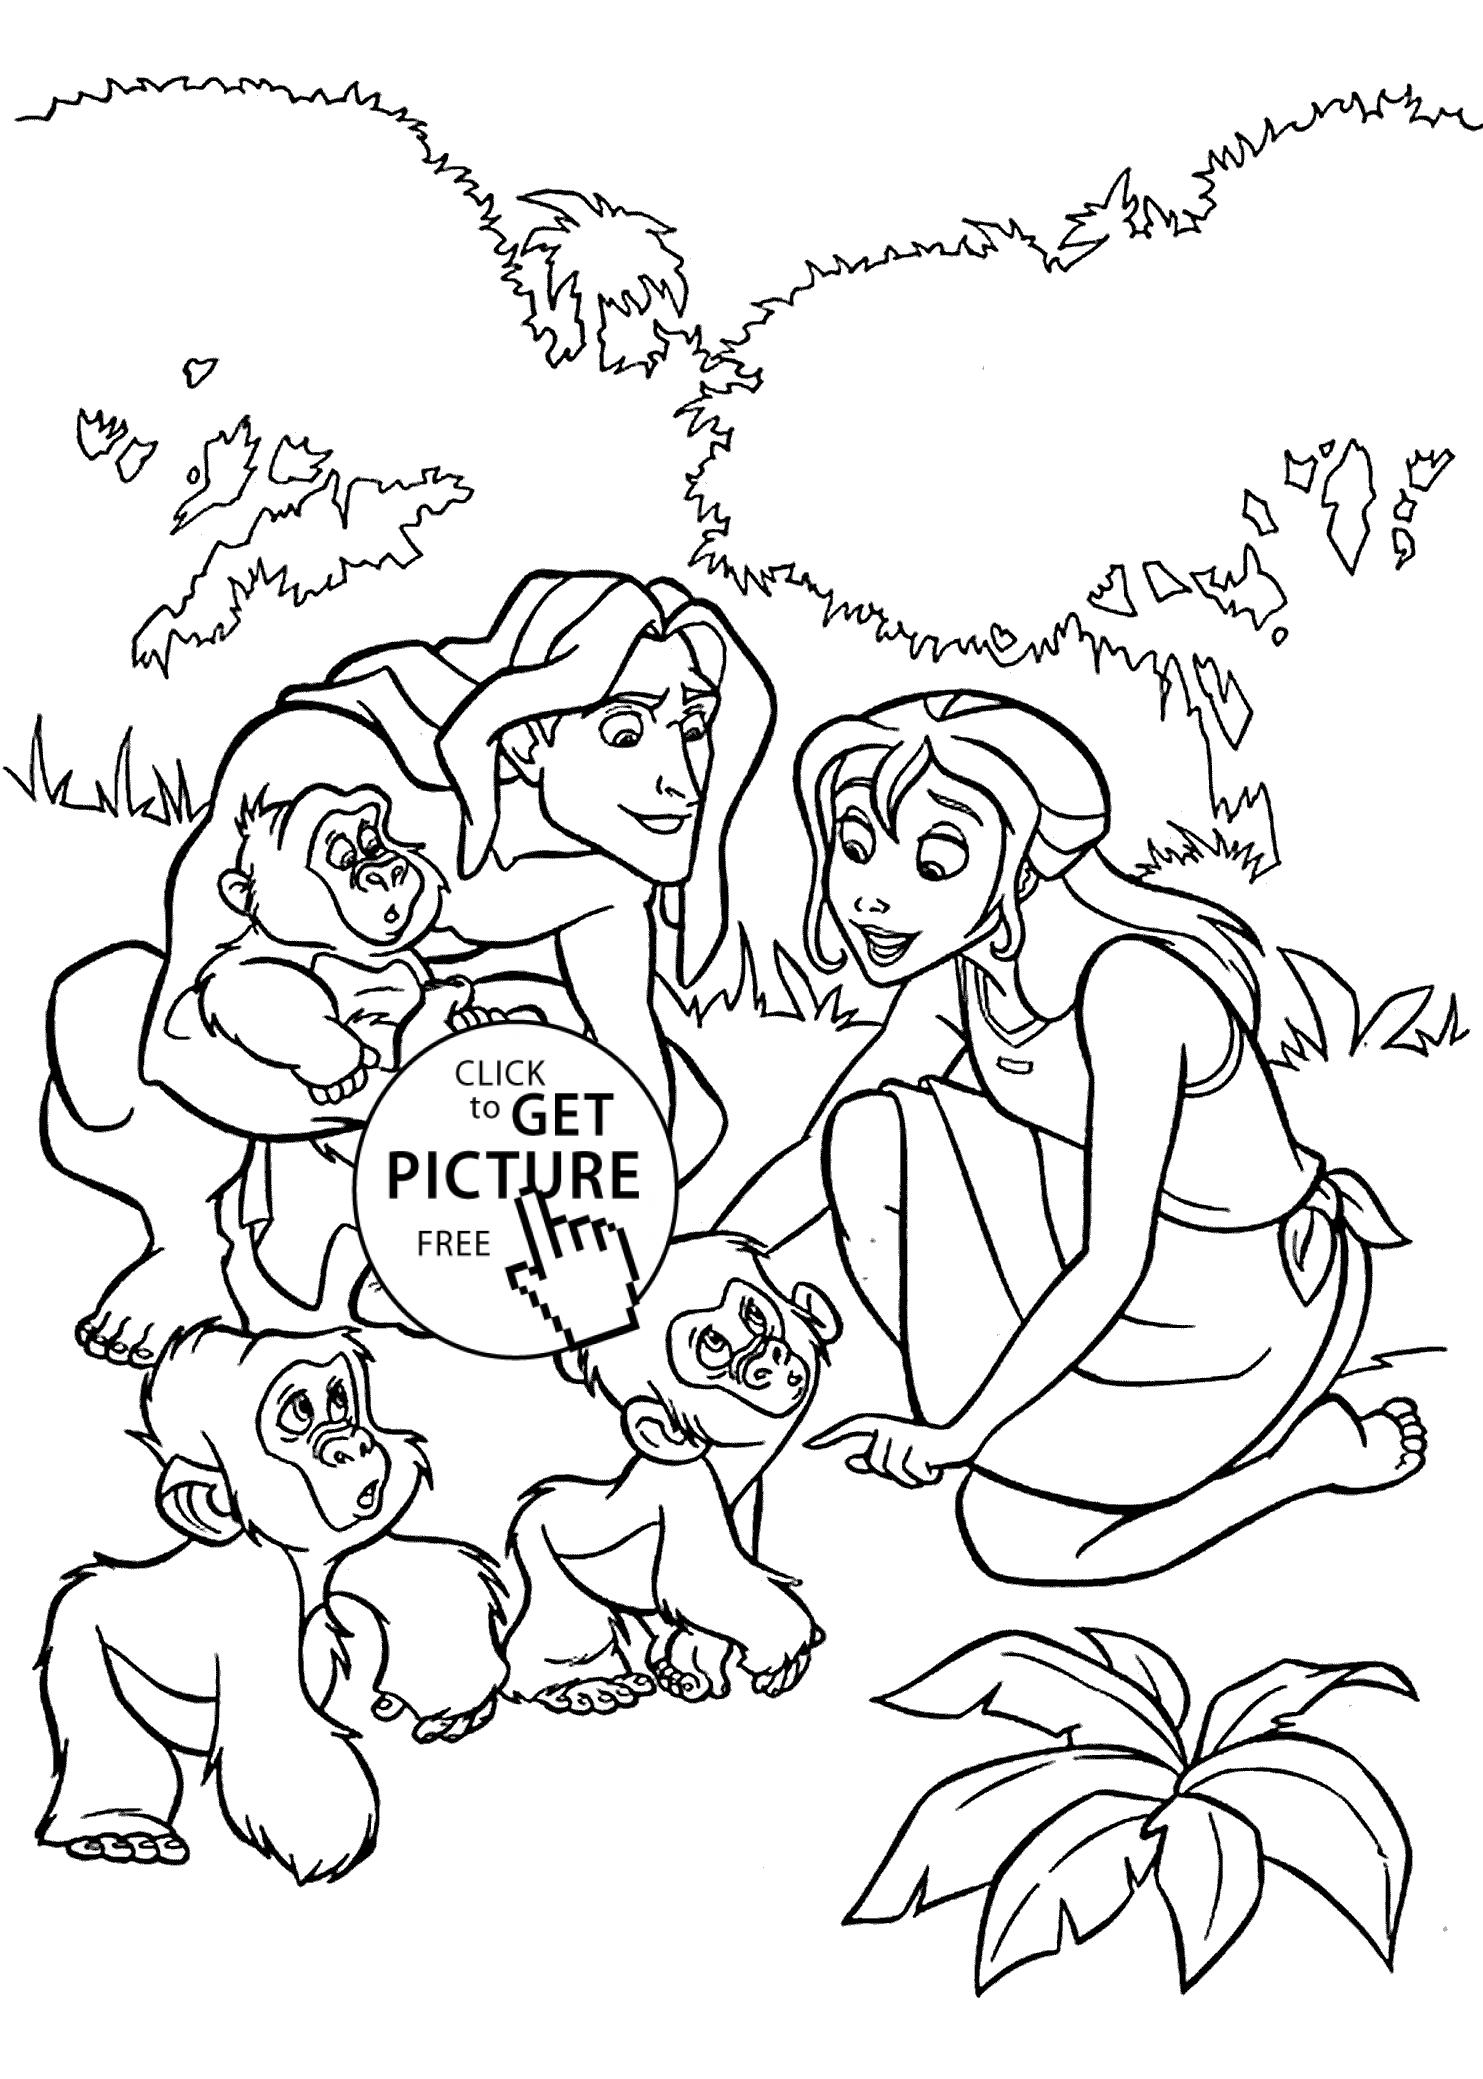 Tarzan, Jane and little monkies coloring pages for kids, printable ...